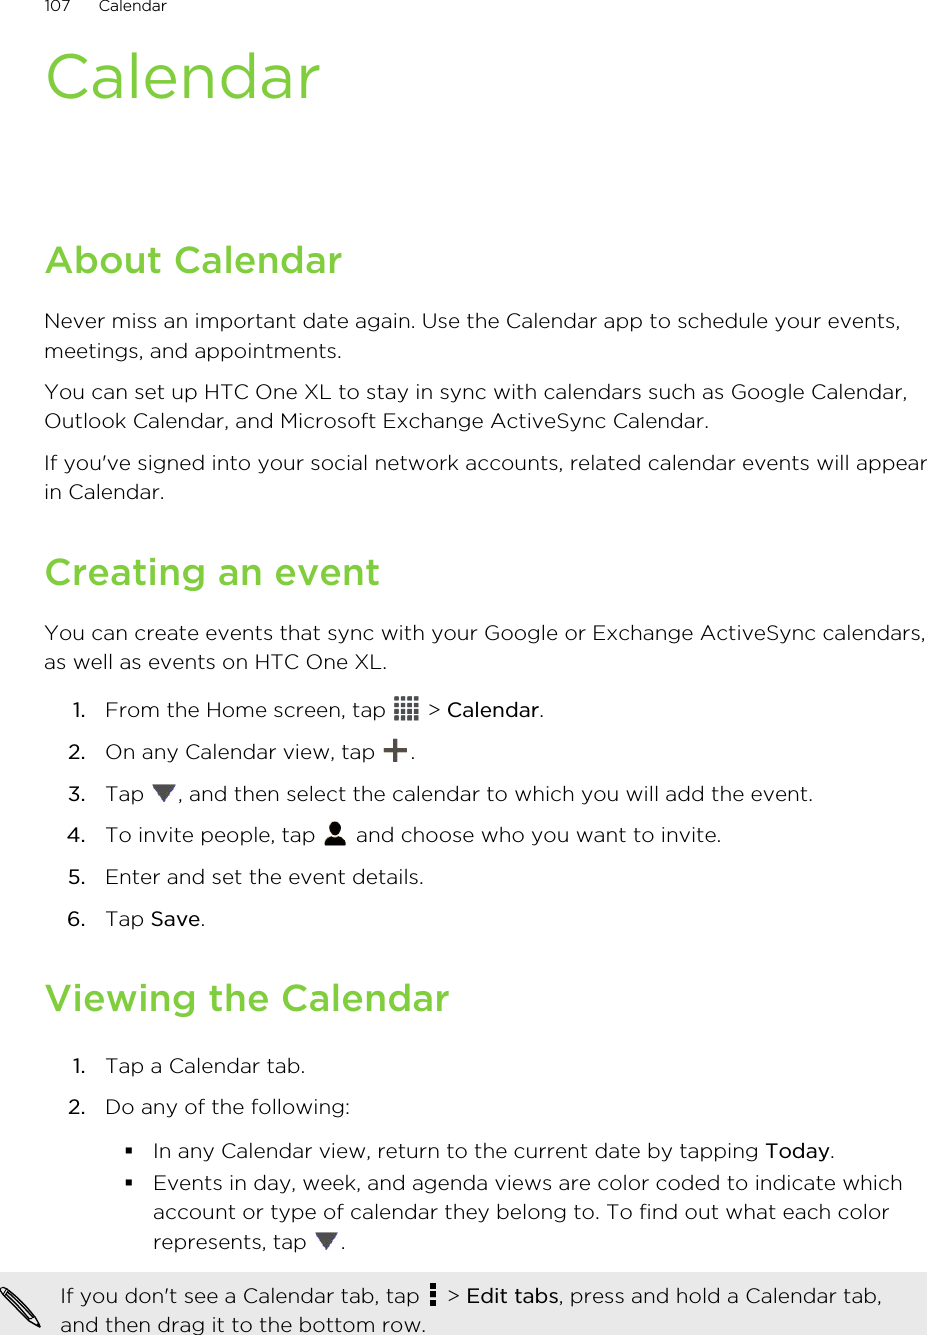 CalendarAbout CalendarNever miss an important date again. Use the Calendar app to schedule your events,meetings, and appointments.You can set up HTC One XL to stay in sync with calendars such as Google Calendar,Outlook Calendar, and Microsoft Exchange ActiveSync Calendar.If you&apos;ve signed into your social network accounts, related calendar events will appearin Calendar.Creating an eventYou can create events that sync with your Google or Exchange ActiveSync calendars,as well as events on HTC One XL.1. From the Home screen, tap   &gt; Calendar.2. On any Calendar view, tap  .3. Tap  , and then select the calendar to which you will add the event.4. To invite people, tap   and choose who you want to invite.5. Enter and set the event details.6. Tap Save.Viewing the Calendar1. Tap a Calendar tab.2. Do any of the following:§In any Calendar view, return to the current date by tapping Today.§Events in day, week, and agenda views are color coded to indicate whichaccount or type of calendar they belong to. To find out what each colorrepresents, tap  .If you don&apos;t see a Calendar tab, tap   &gt; Edit tabs, press and hold a Calendar tab,and then drag it to the bottom row.107 Calendar